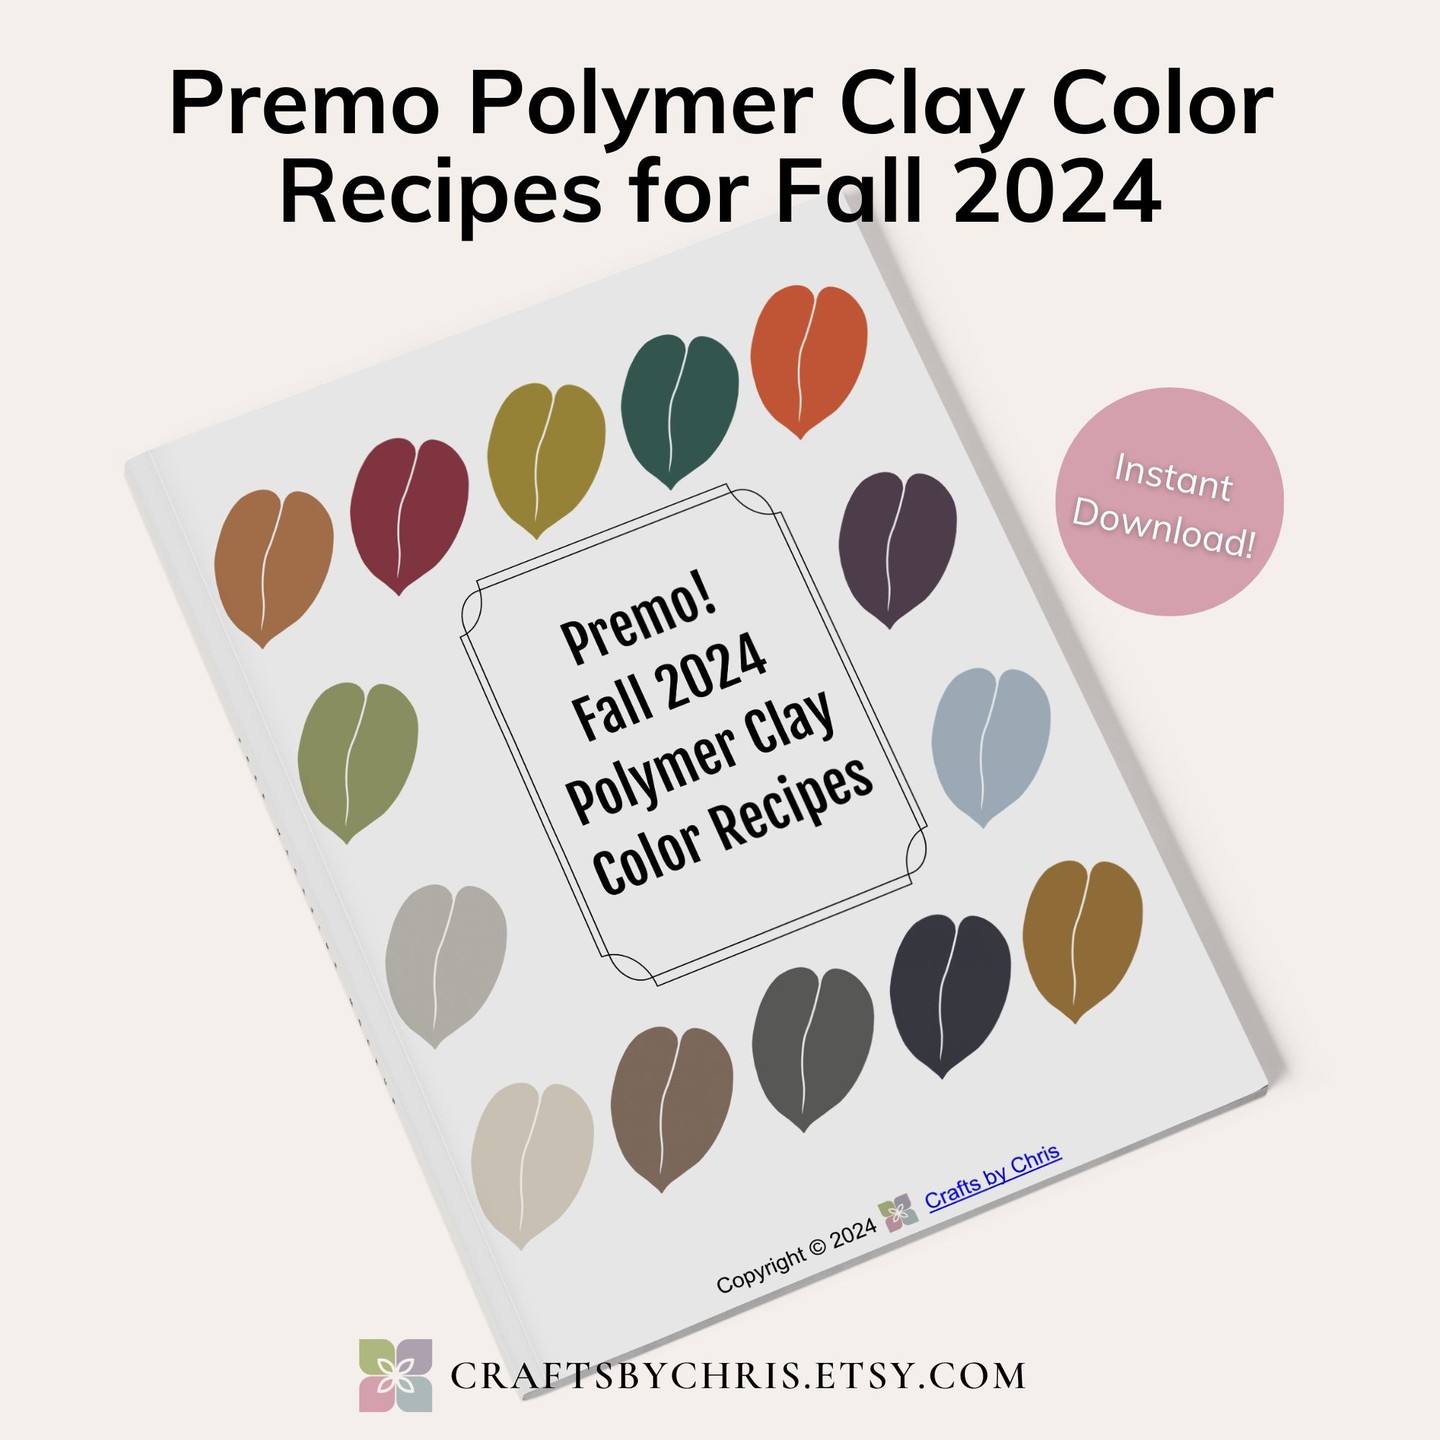 Premo Fall 2024 color recipes are now available. Link in bio

#polymerclaycolorrecipes #polymerclaycolormixing #polymerc